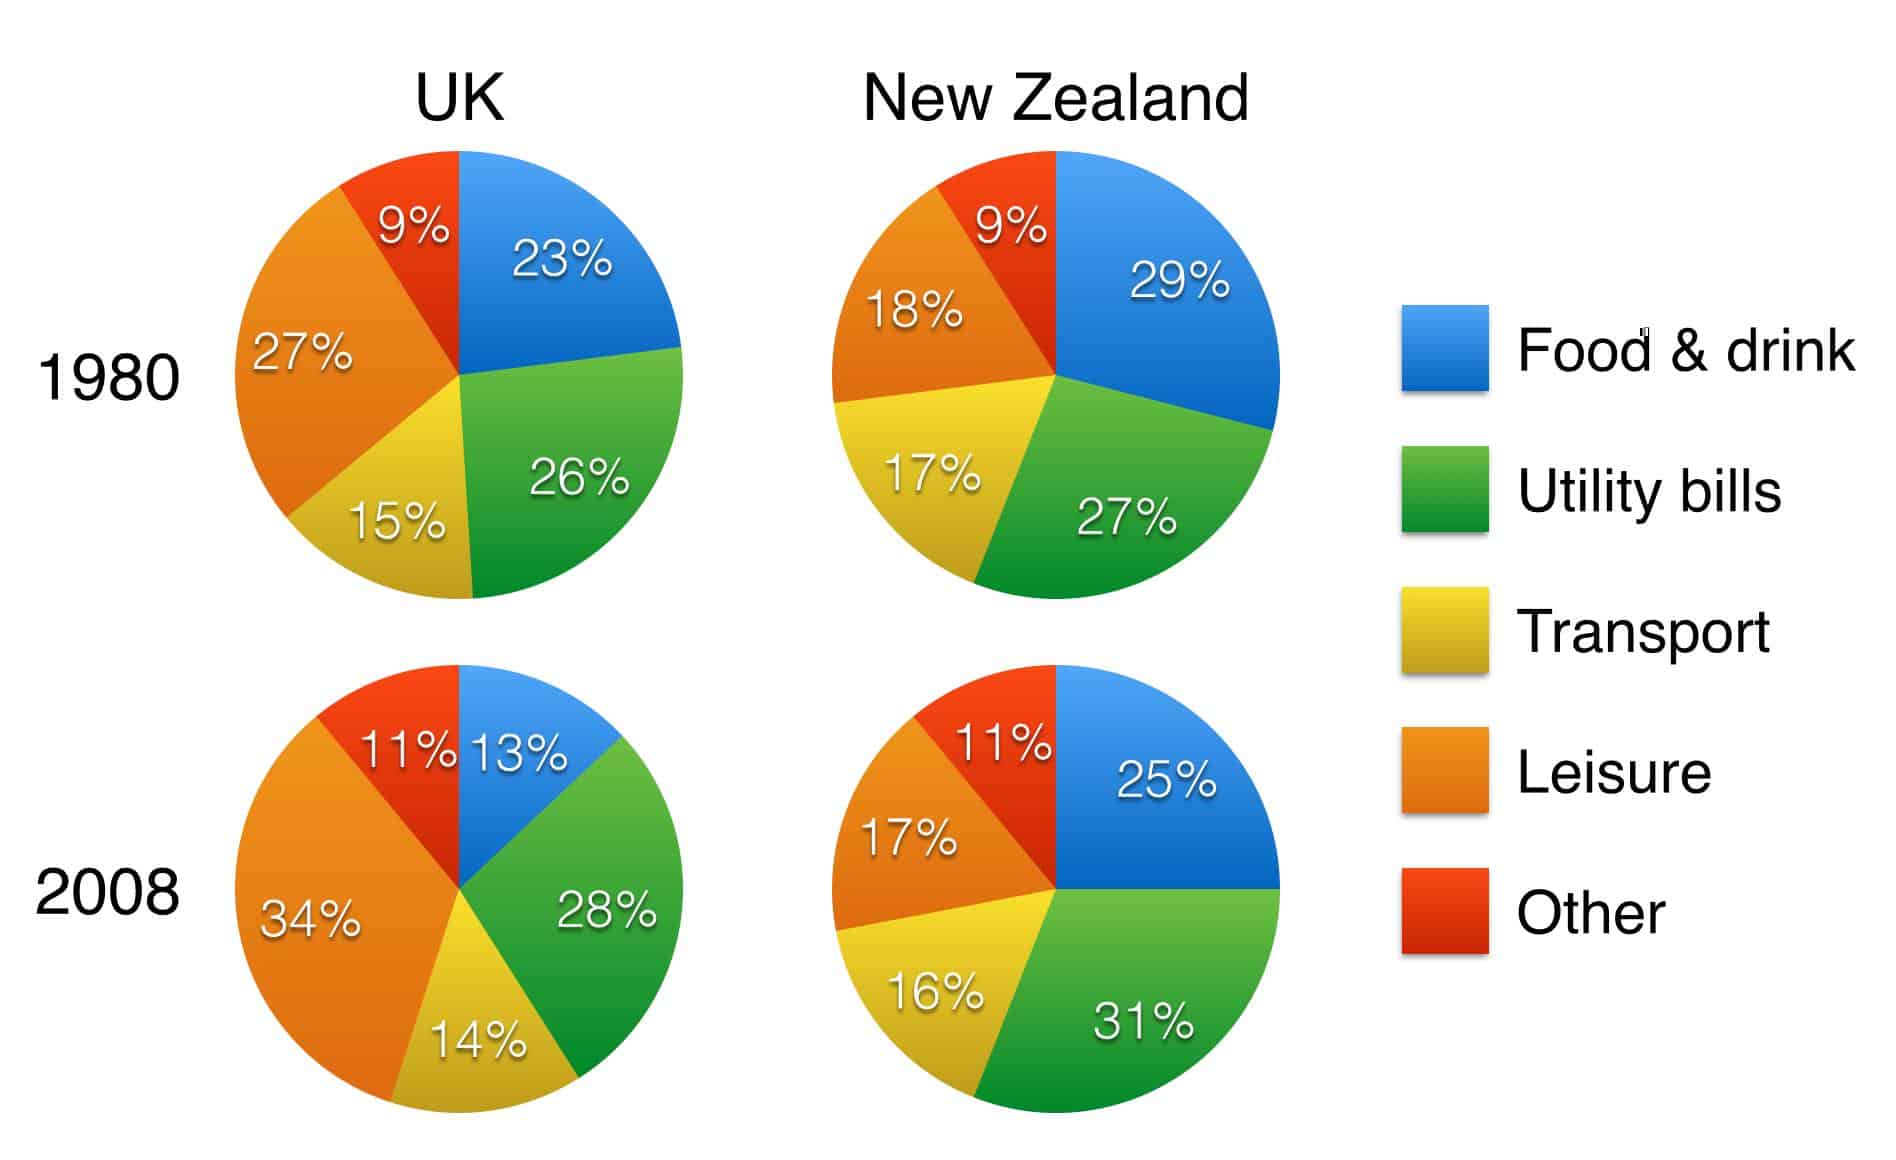 IELTS writing pie chart spending pattern in the UK and New Zealand